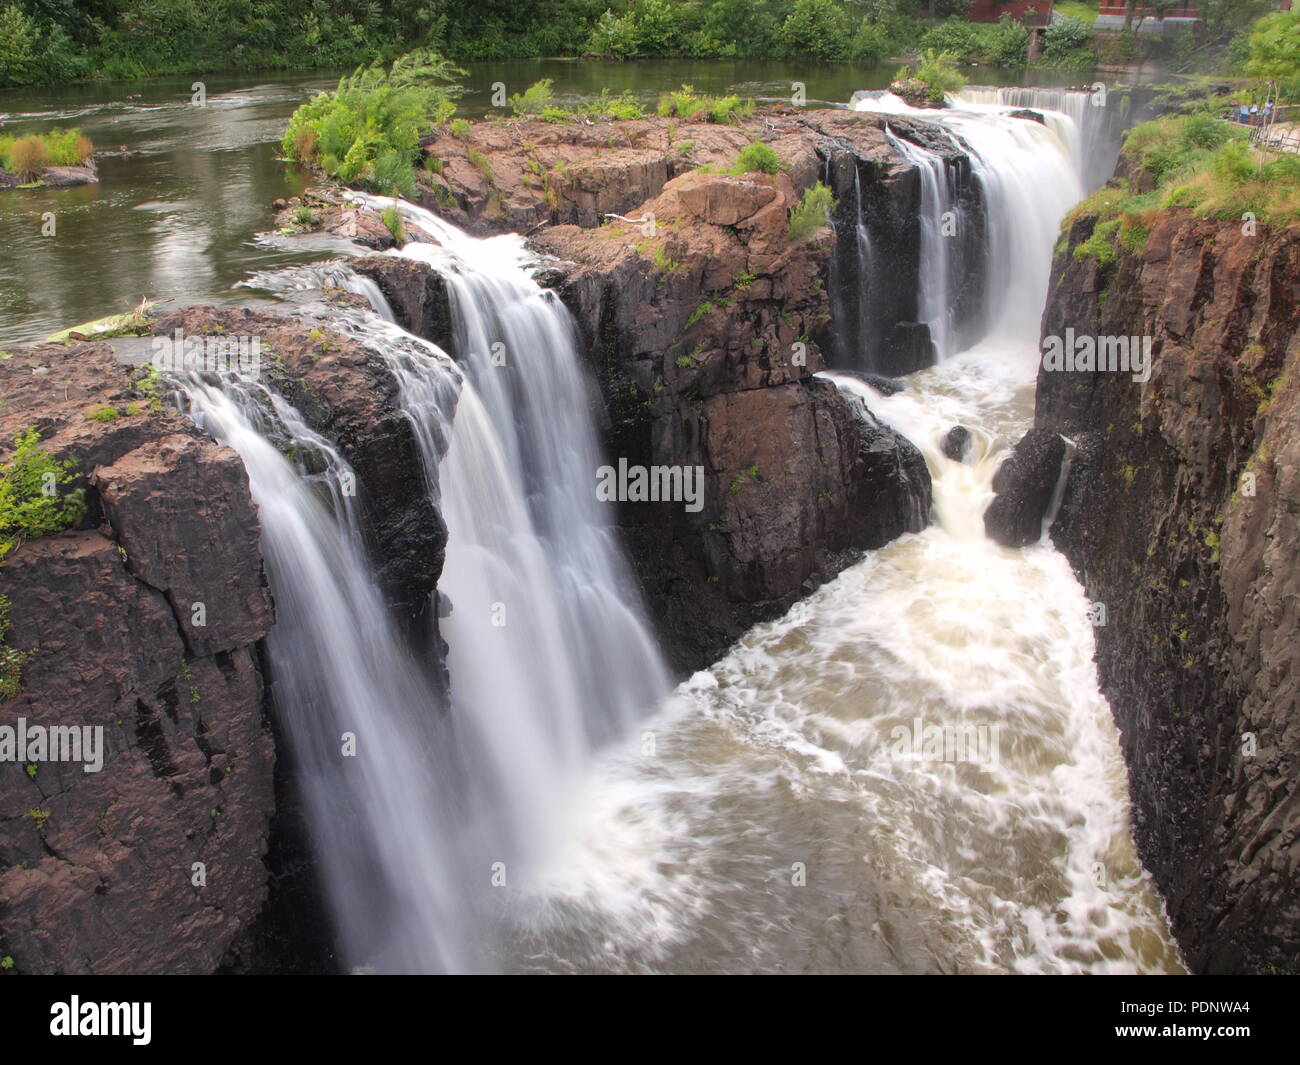 The great falls in Paterson, NJ after heavy rains increasing the flow. Stock Photo